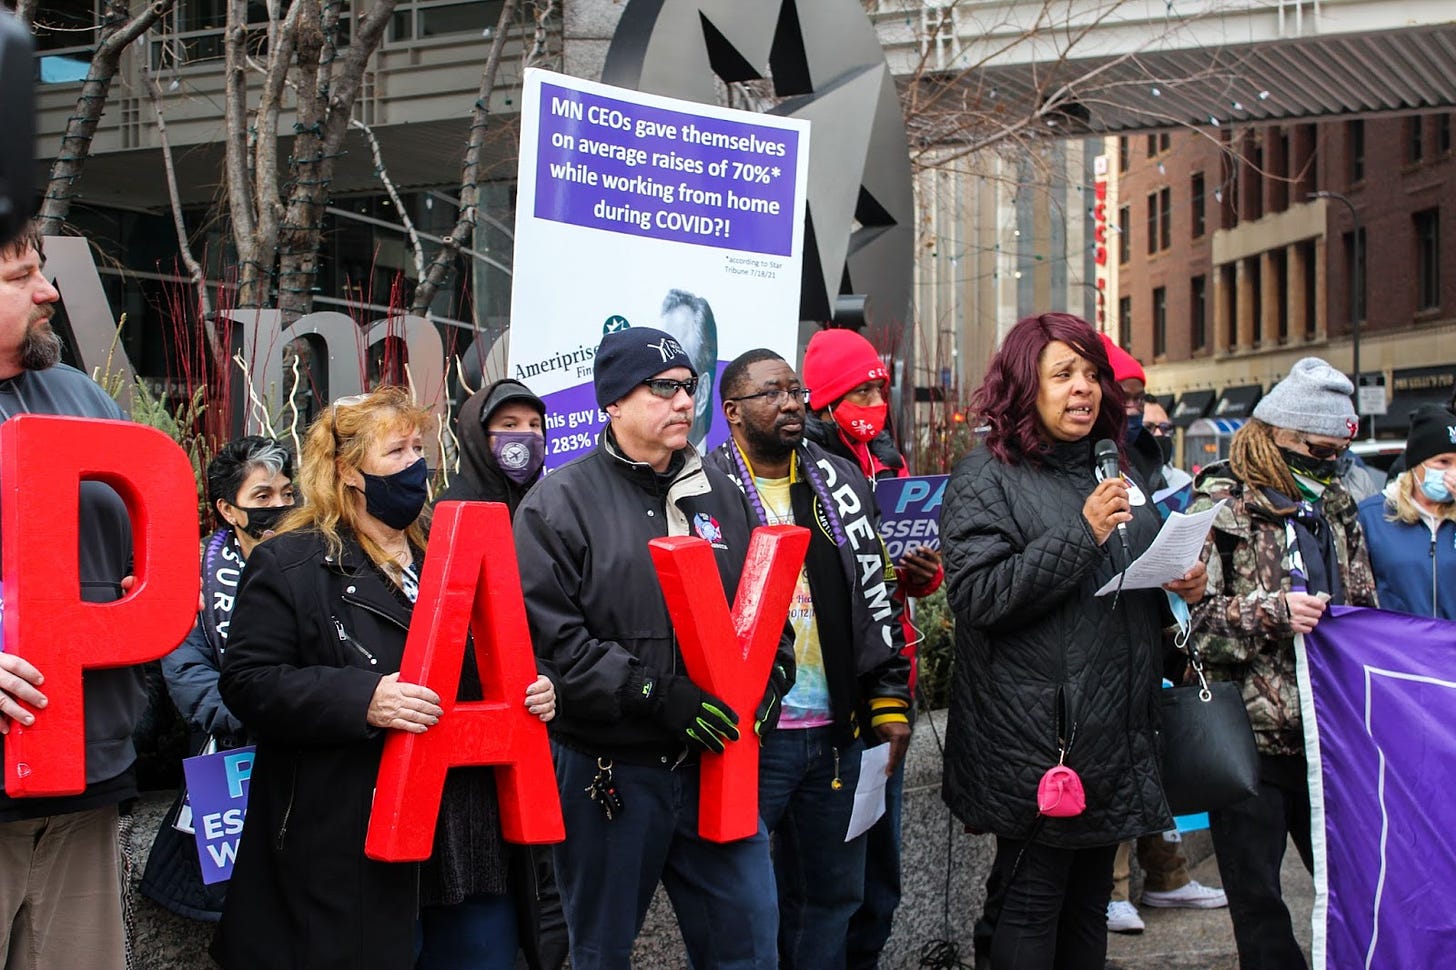 members of a crowd hold big red letters spelling "PAY" while a Black woman with red hair stands reading into a microphone